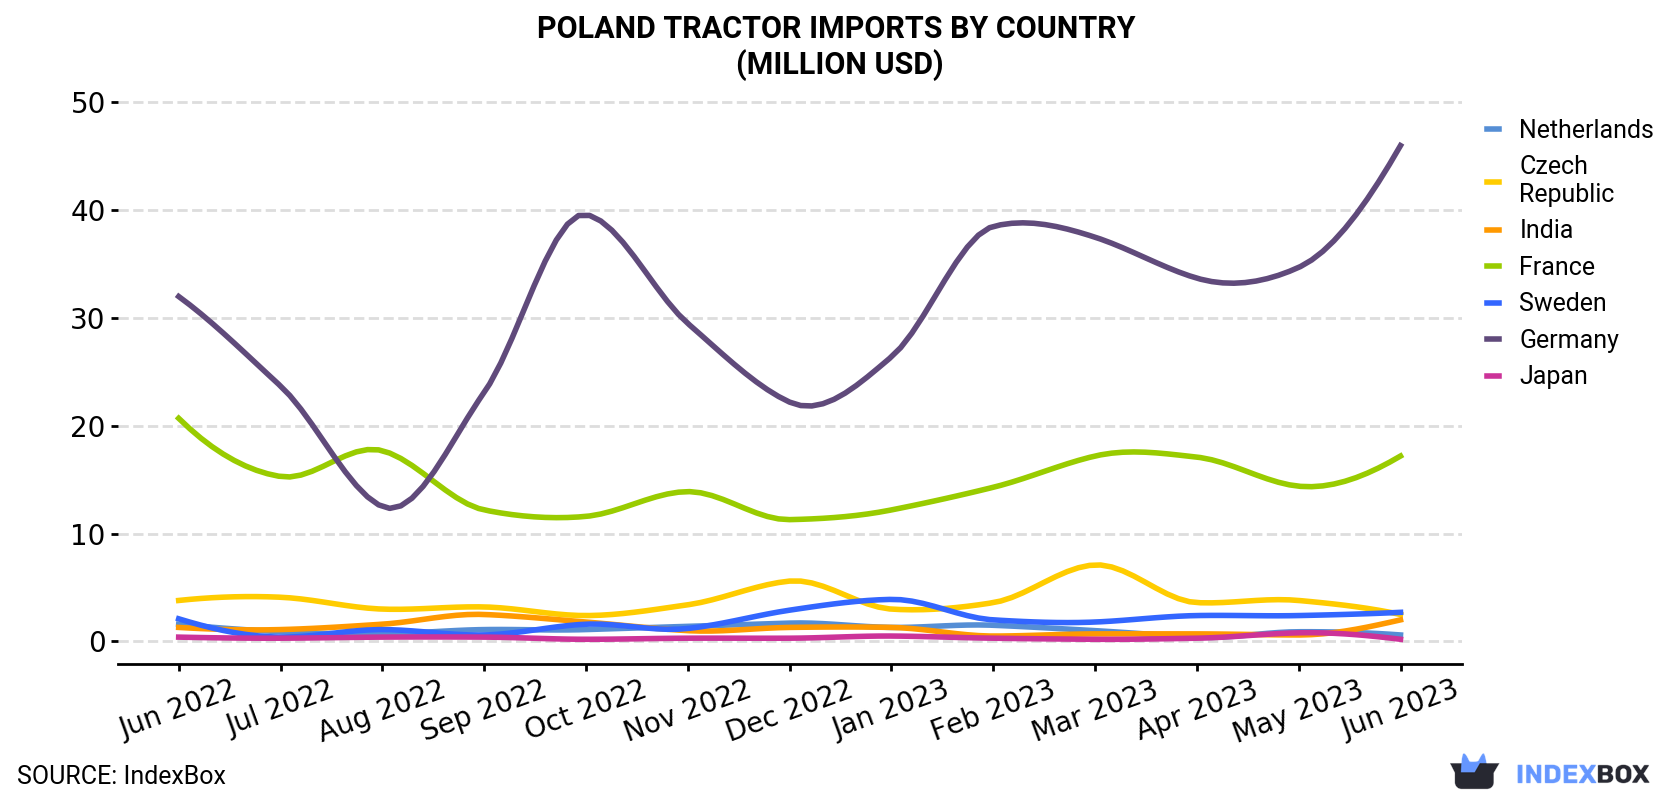 Poland Tractor Imports By Country (Million USD)